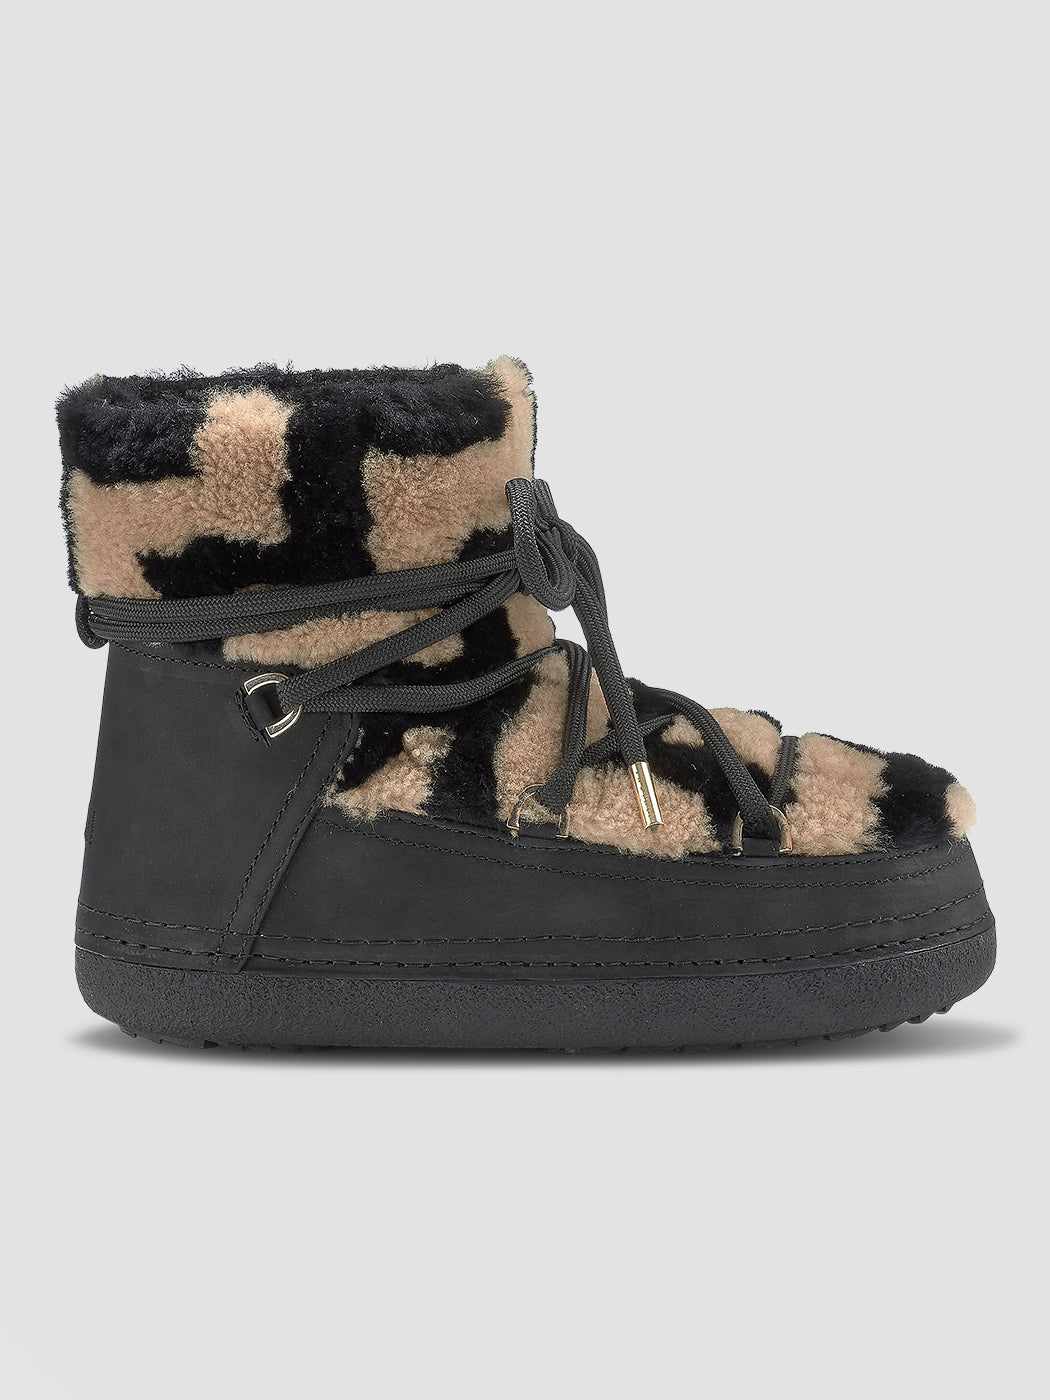 Shearling Zigzag - Brown Carbon38 –